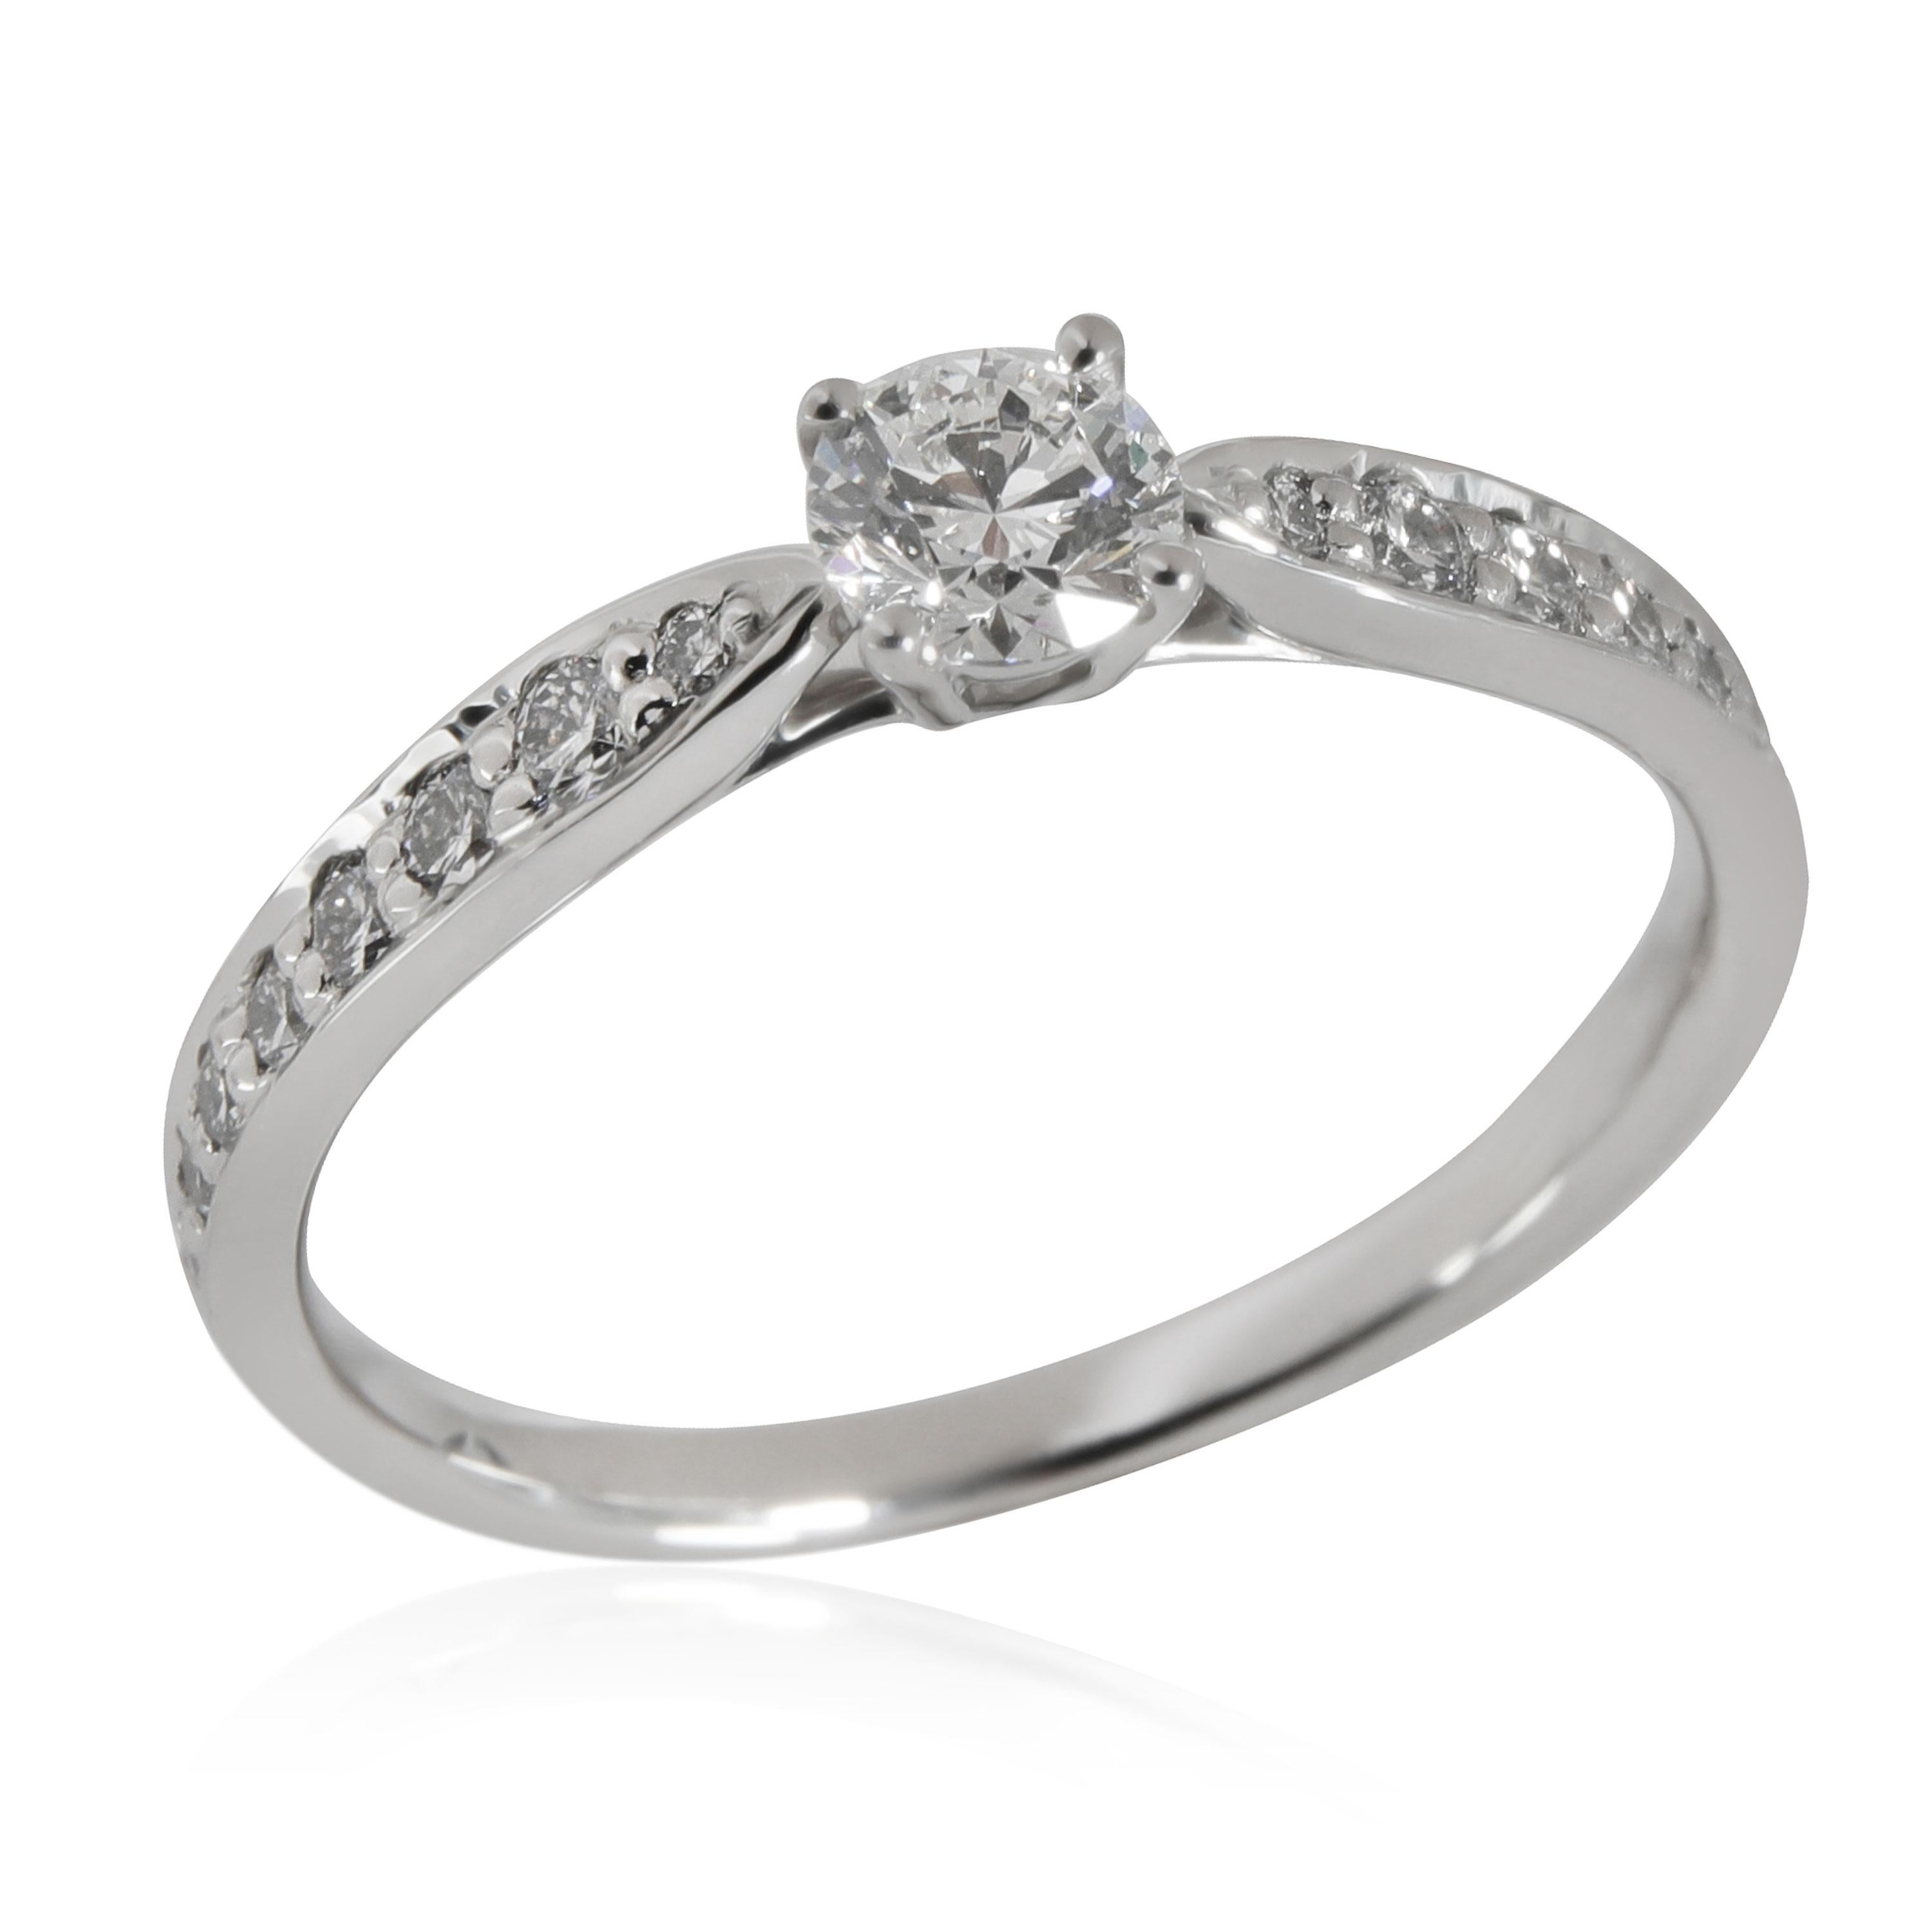 
Tiffany & Co. Harmony Diamond Engagement Ring in Platinum G VS1 0.32 CTW

PRIMARY DETAILS
SKU: 112405
Listing Title: Tiffany & Co. Harmony Diamond Engagement Ring in Platinum G VS1 0.32 CTW
Condition Description: Retails for 3,220 USD. In excellent